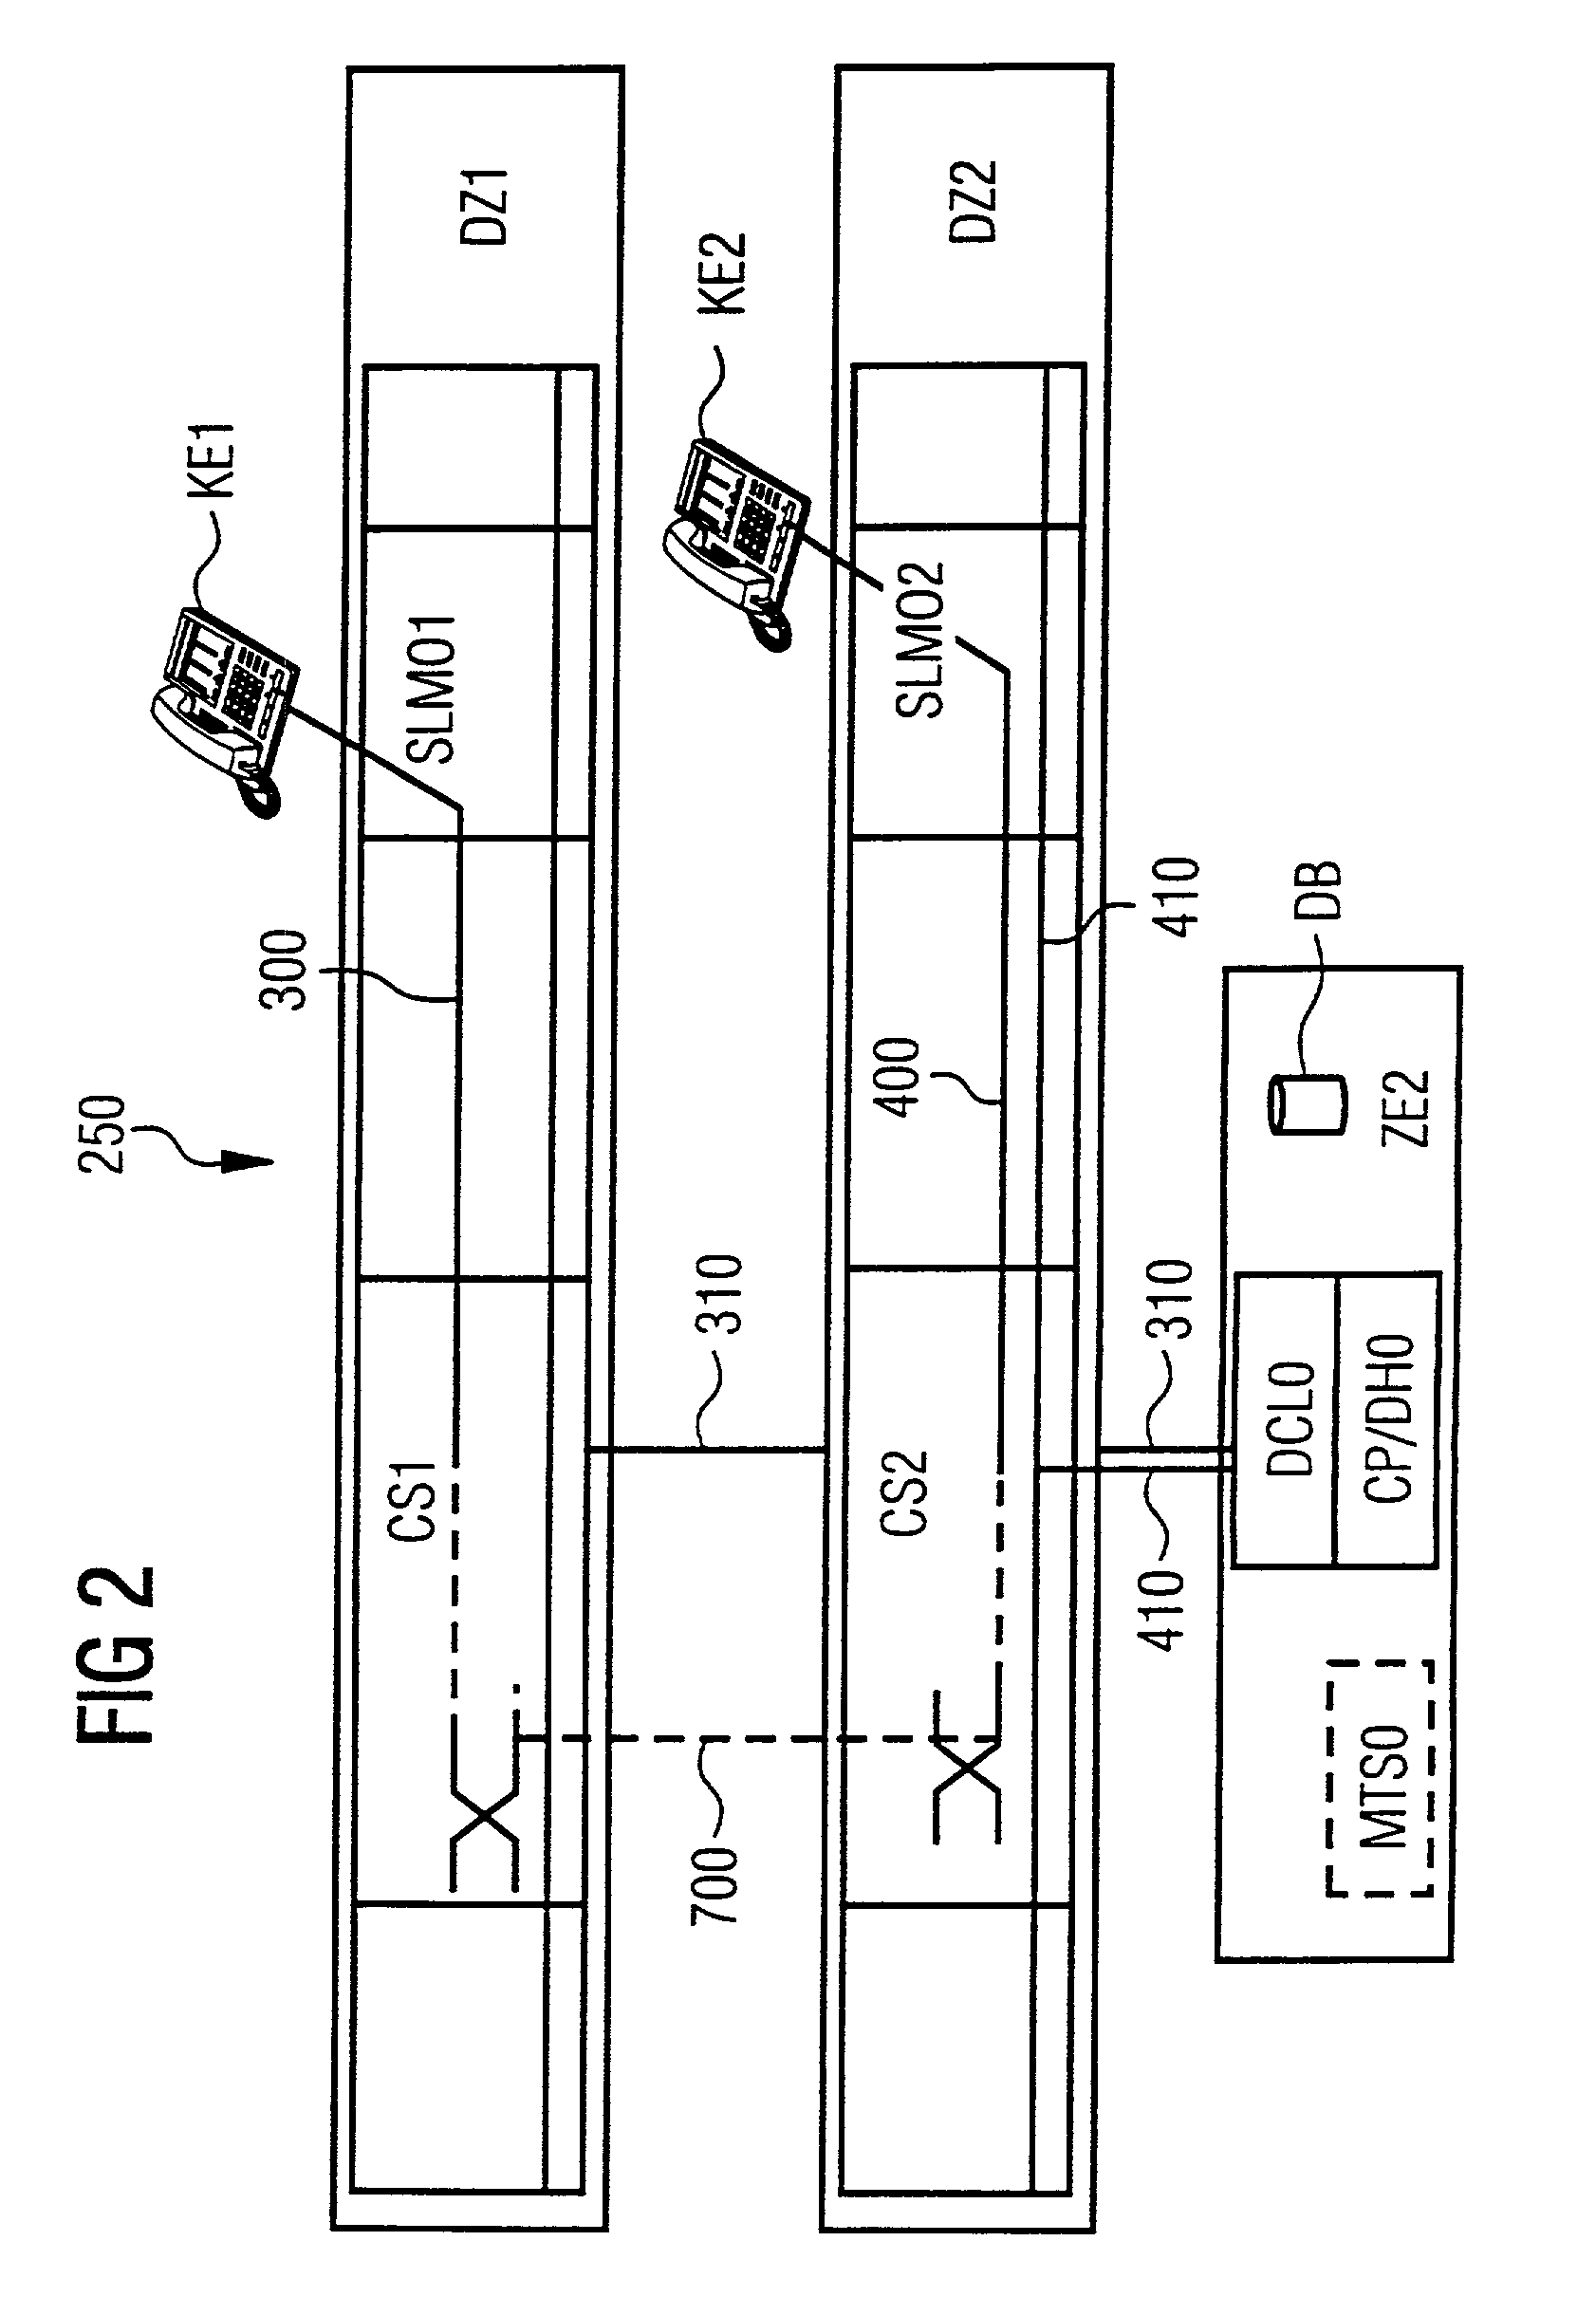 Method and arrangement for coupling messages in a central control device with decentralized communications devices